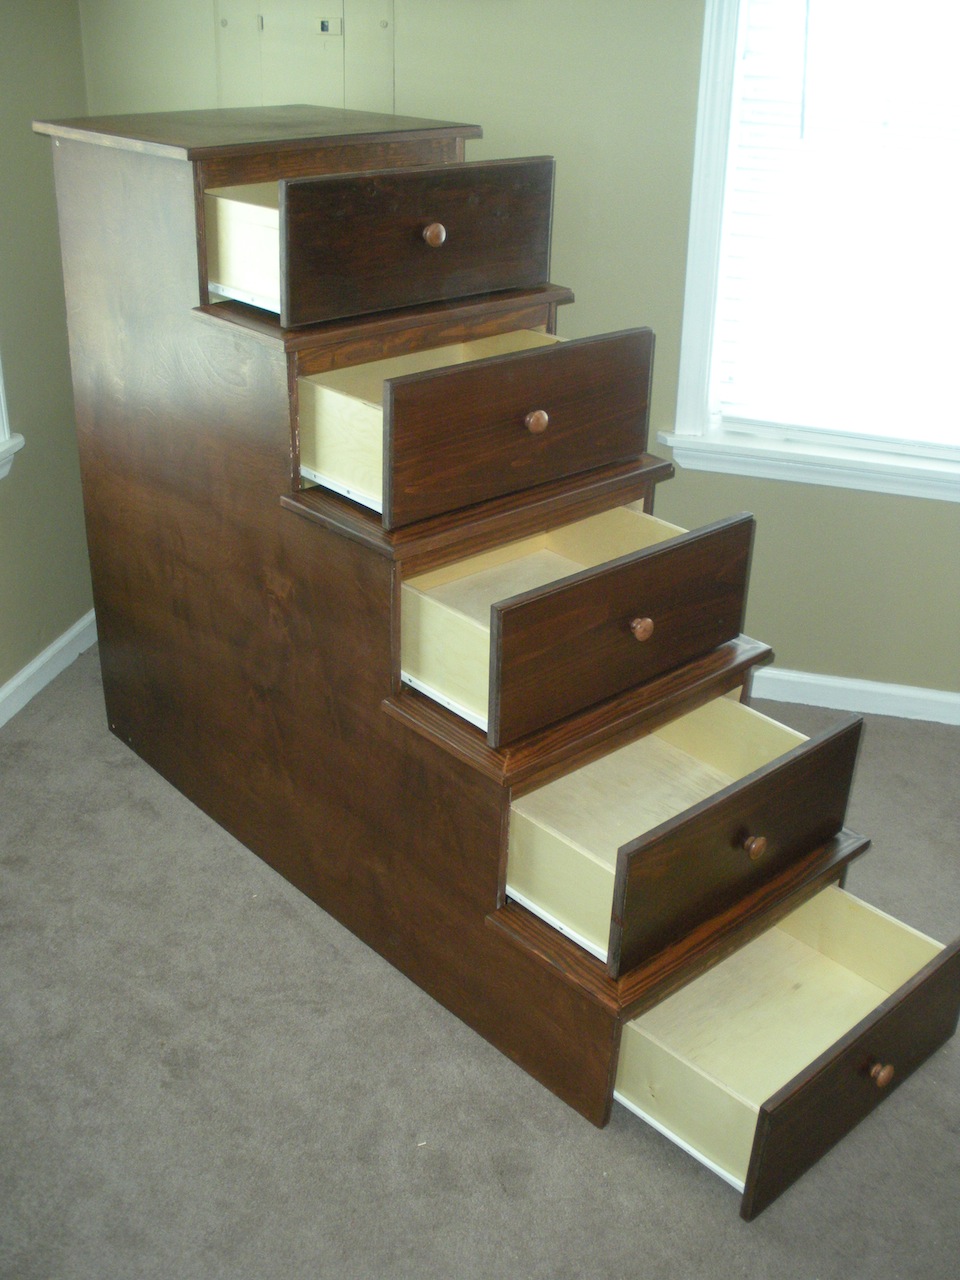 Richard S Bunk Bed Storage The Wood, How To Build A Loft Bed With Stairs And Storage